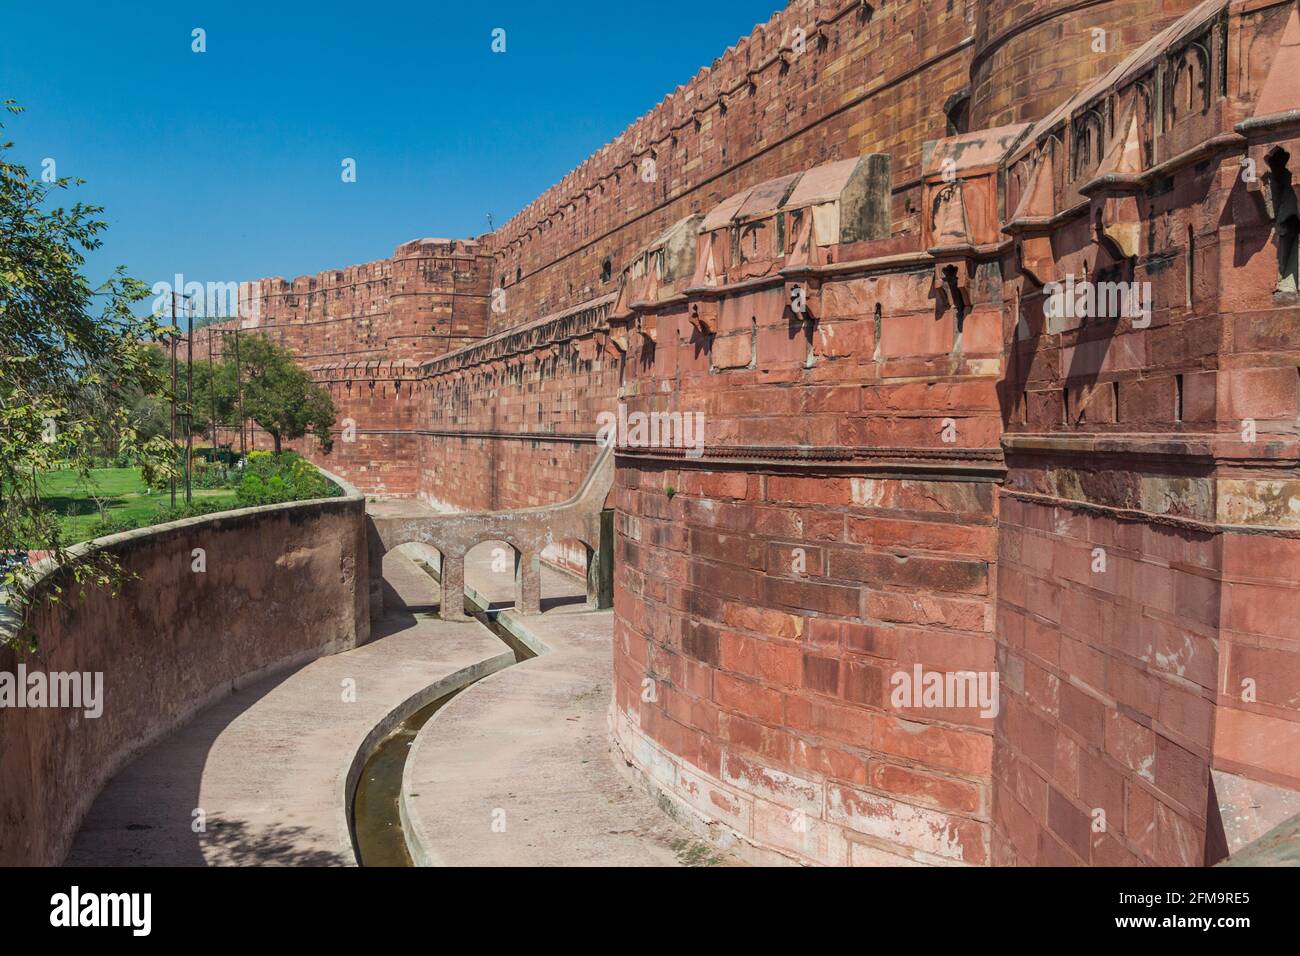 Walls and moat of Agra Fort, Uttar Pradesh state, India Stock Photo